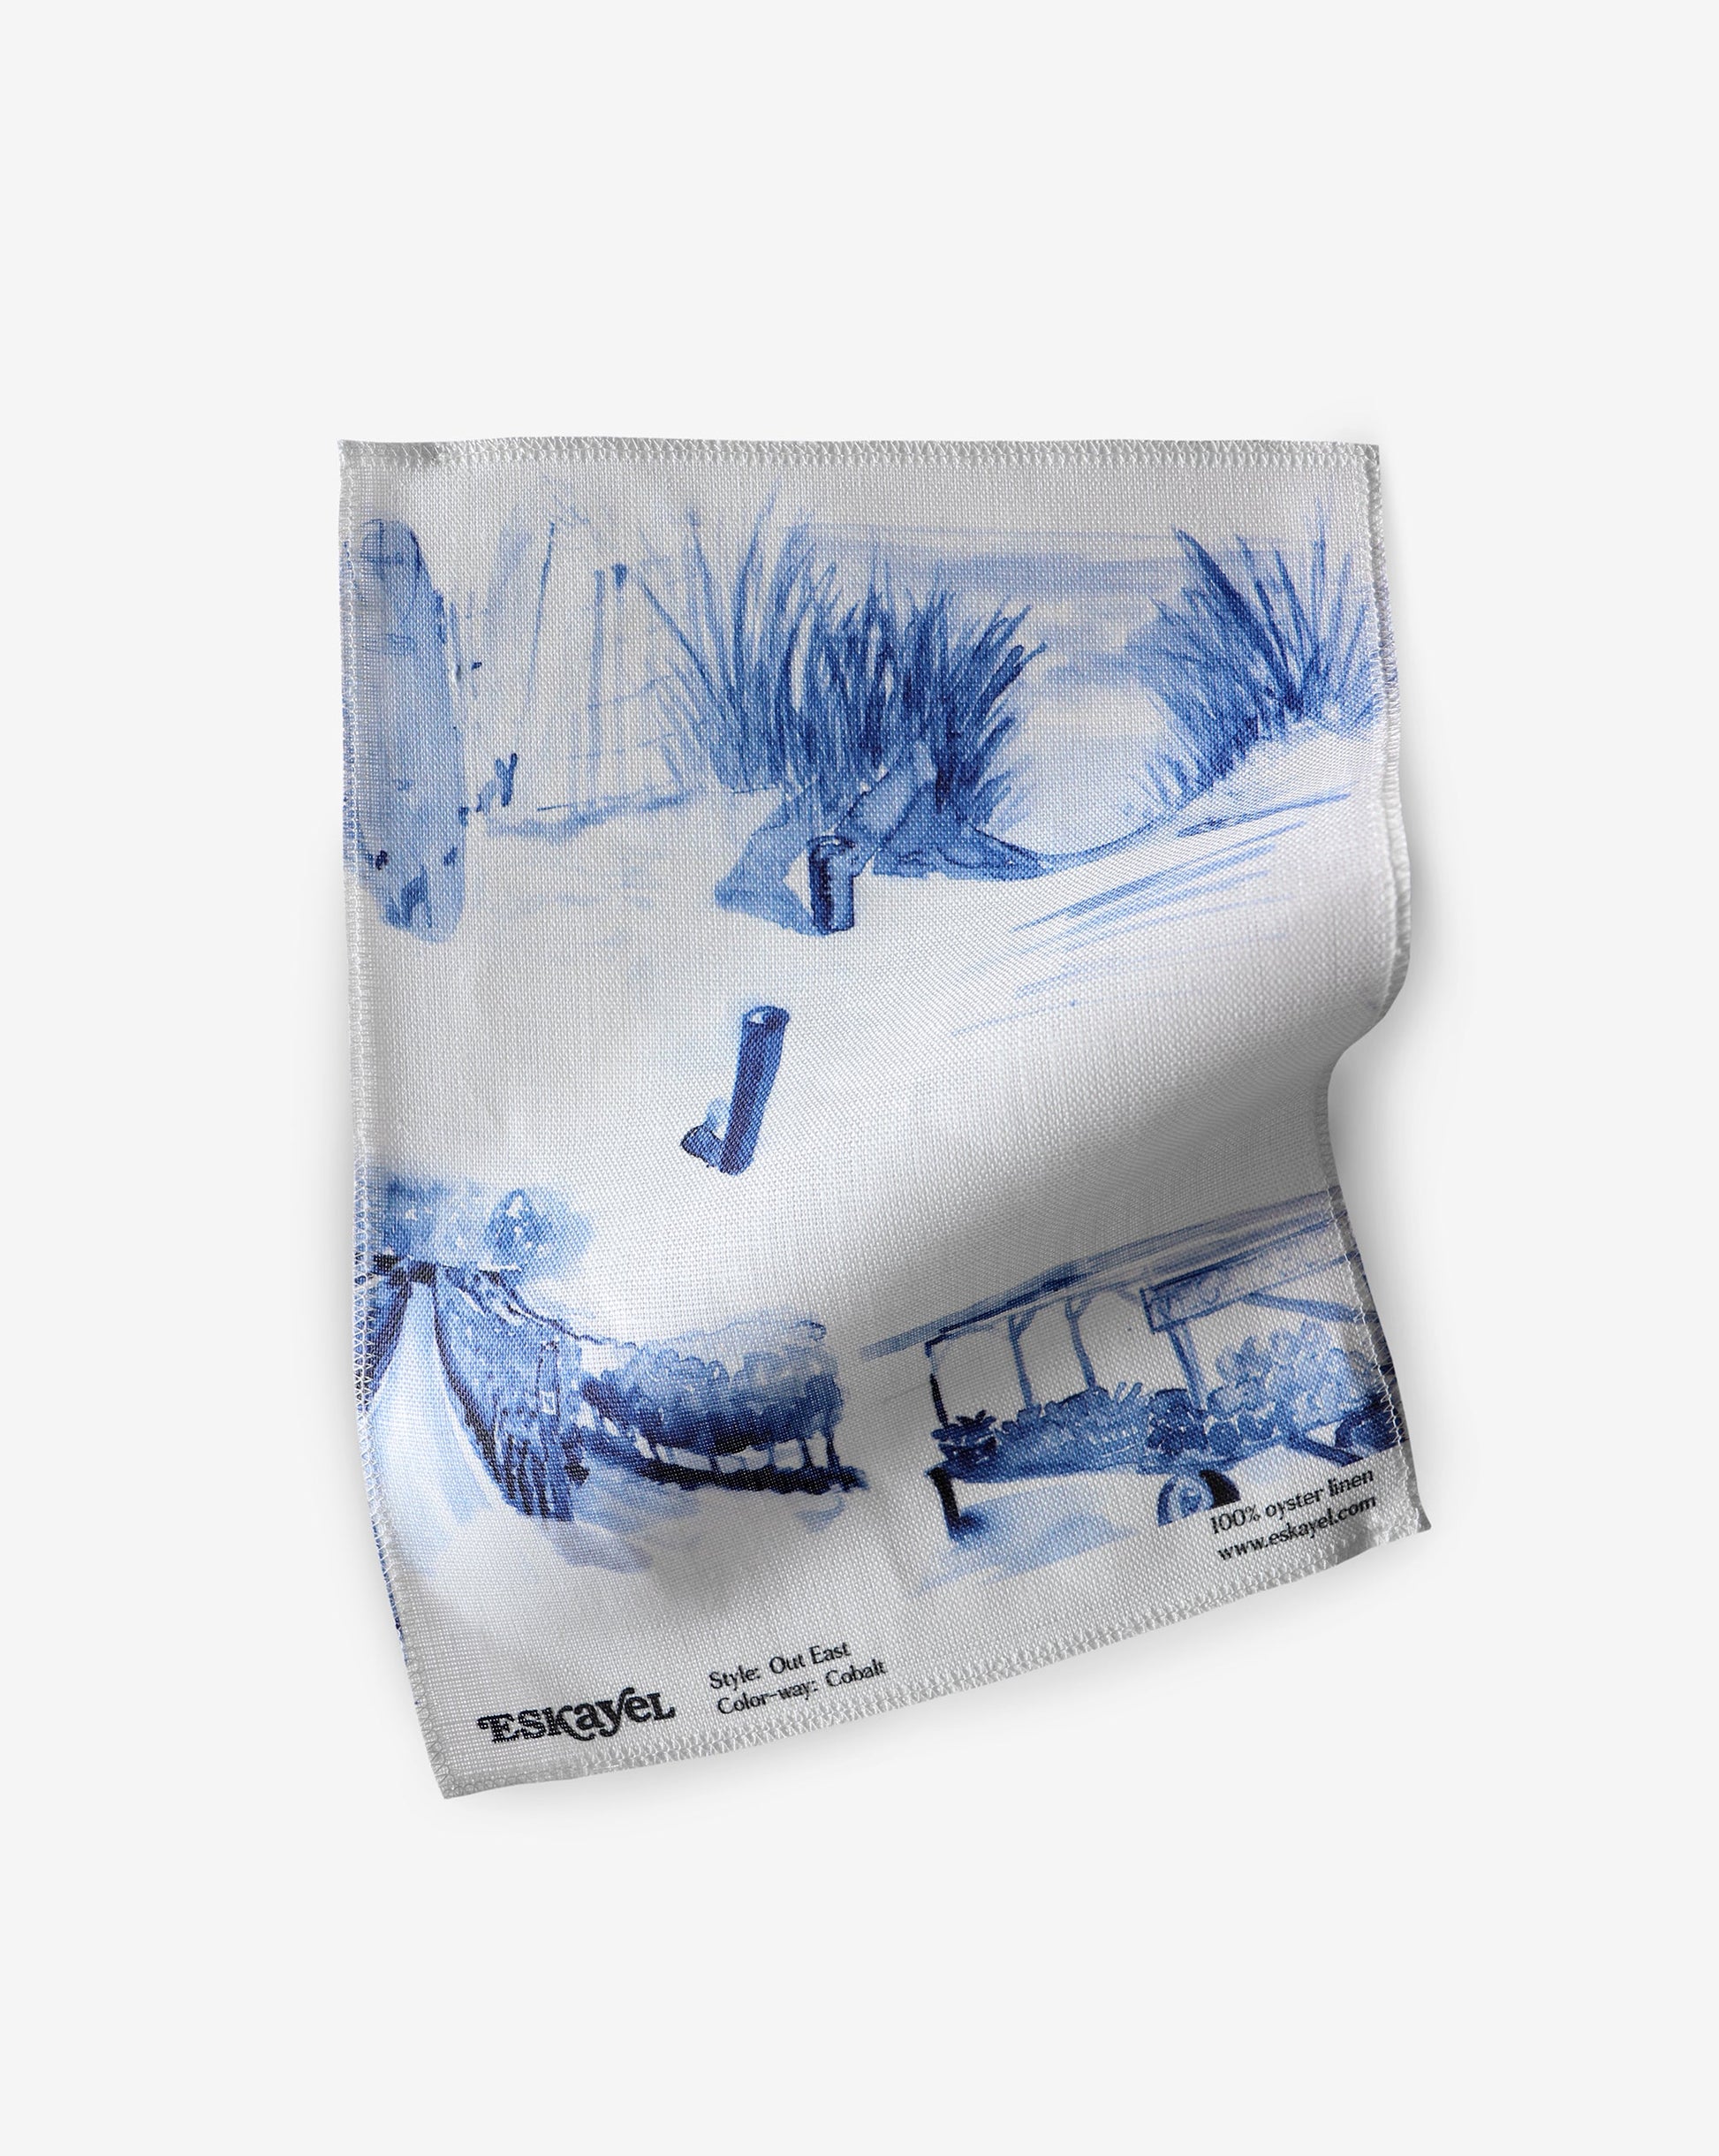 A blue and white Out East Fabric Cobalt with a toile pattern featuring a picture of a boat